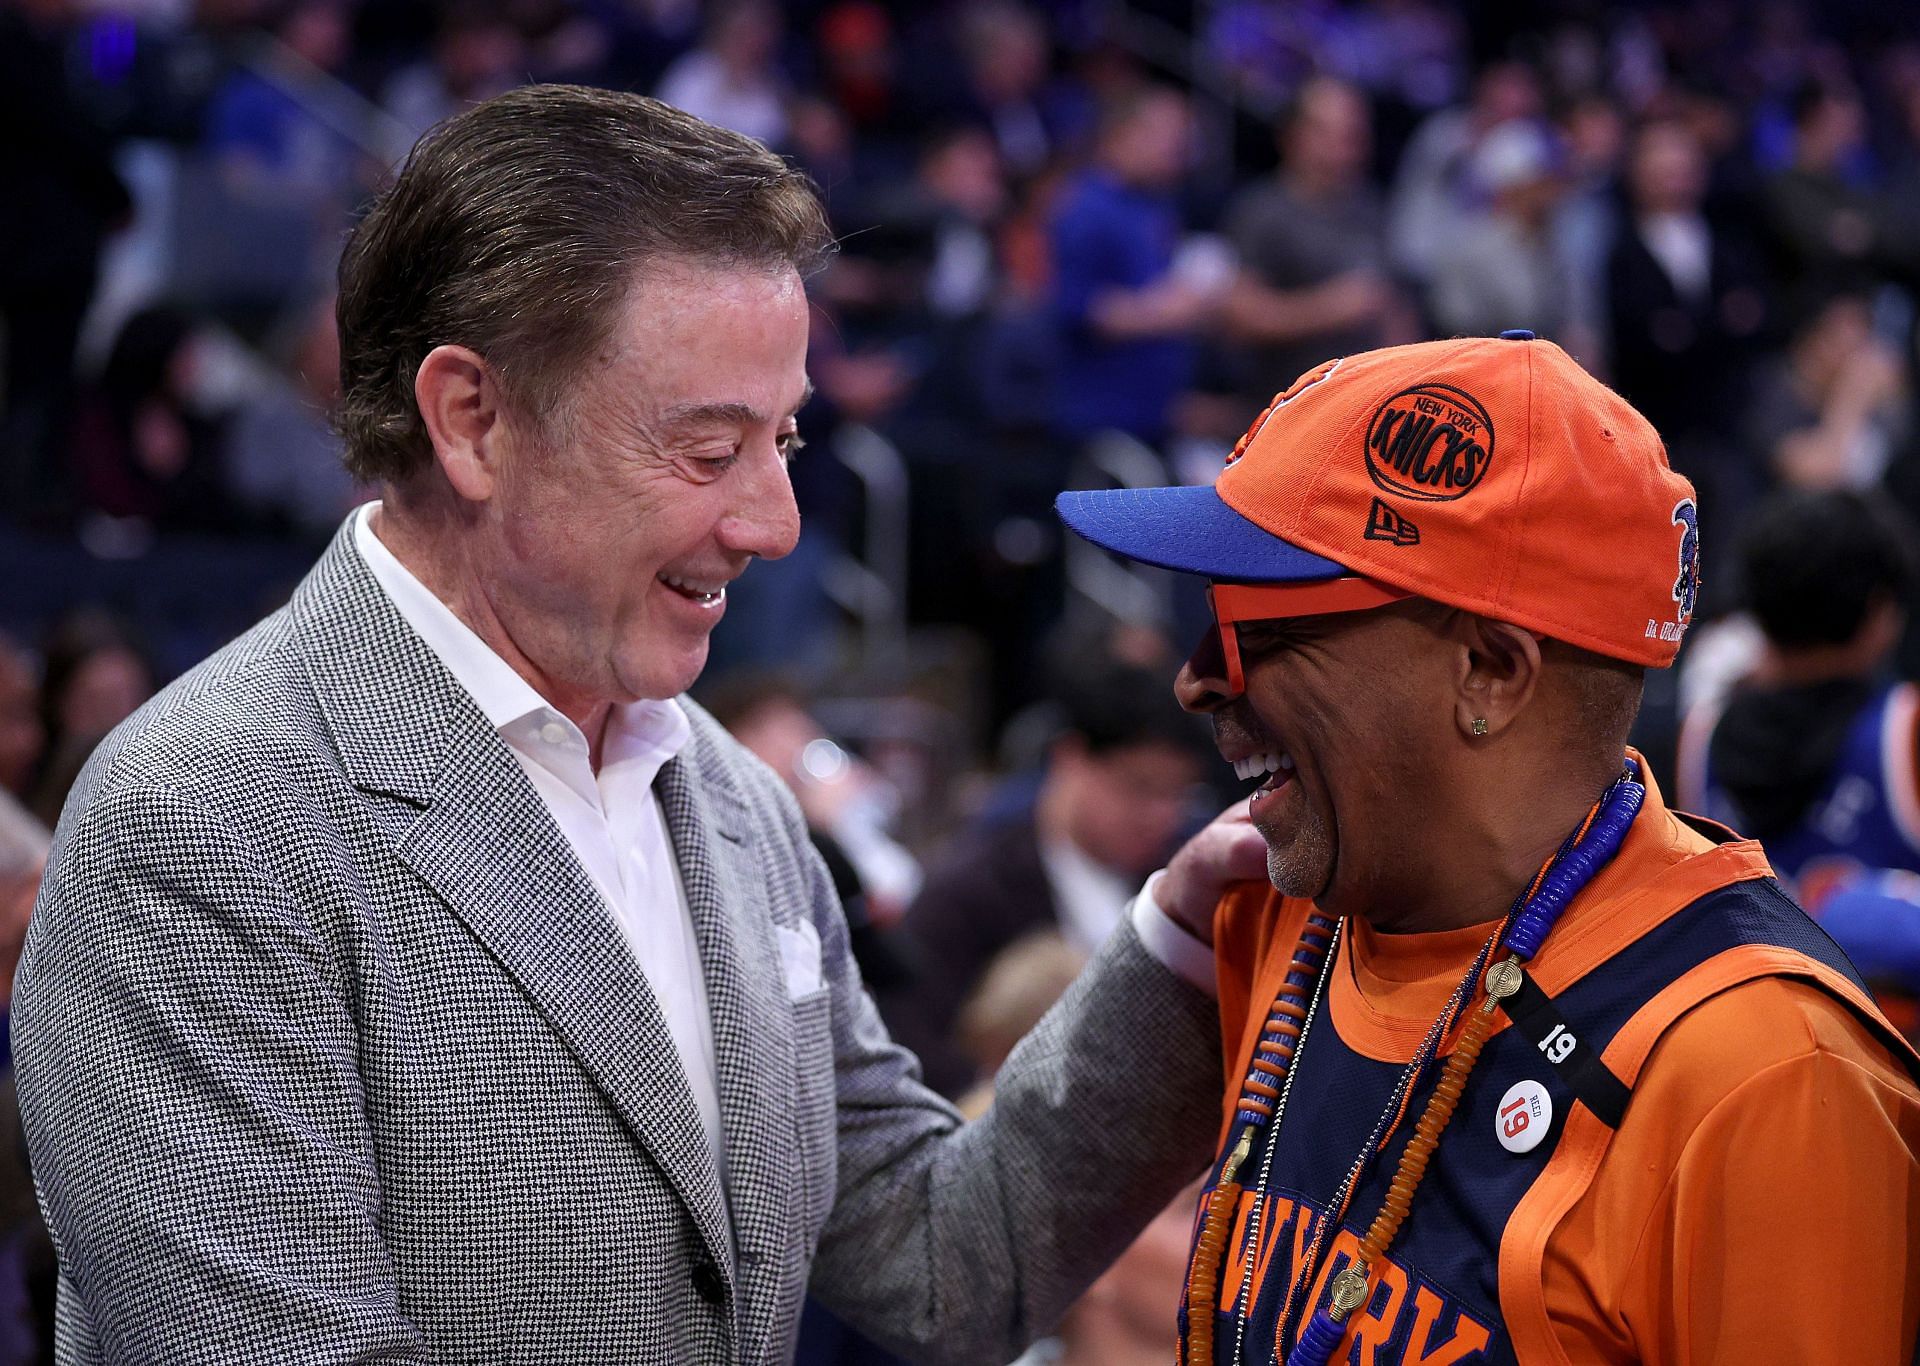 Rick Pitino, shown here with Spike Lee, lost one of the longest college basketball games in history in 2013.